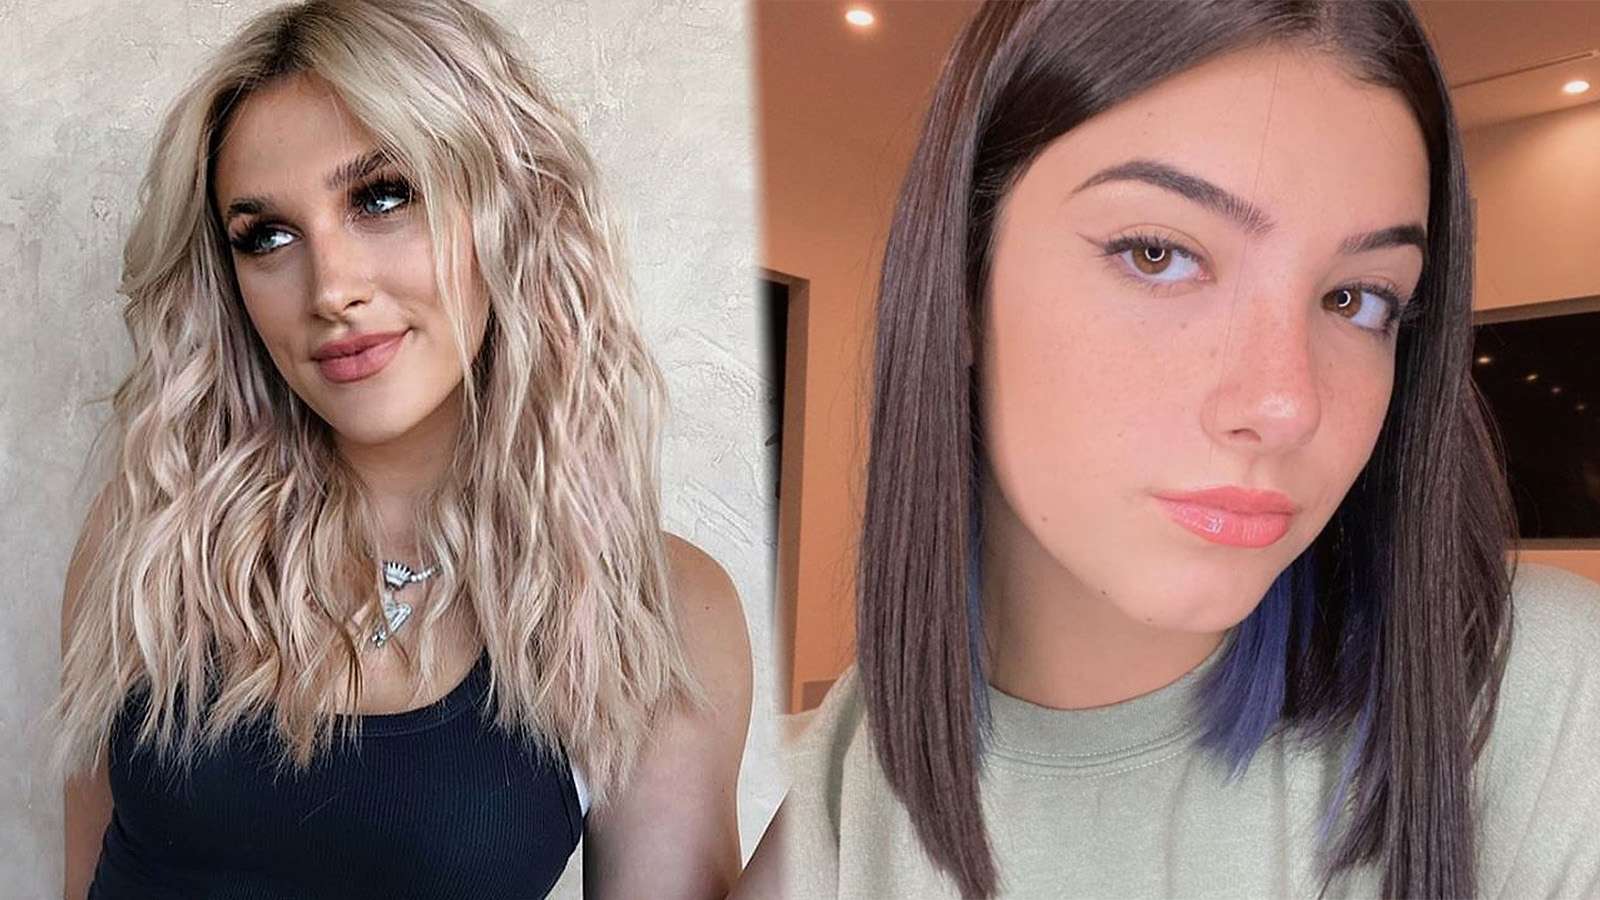 Charli D'Amelio and Madi Monroe show off their new hair styles.